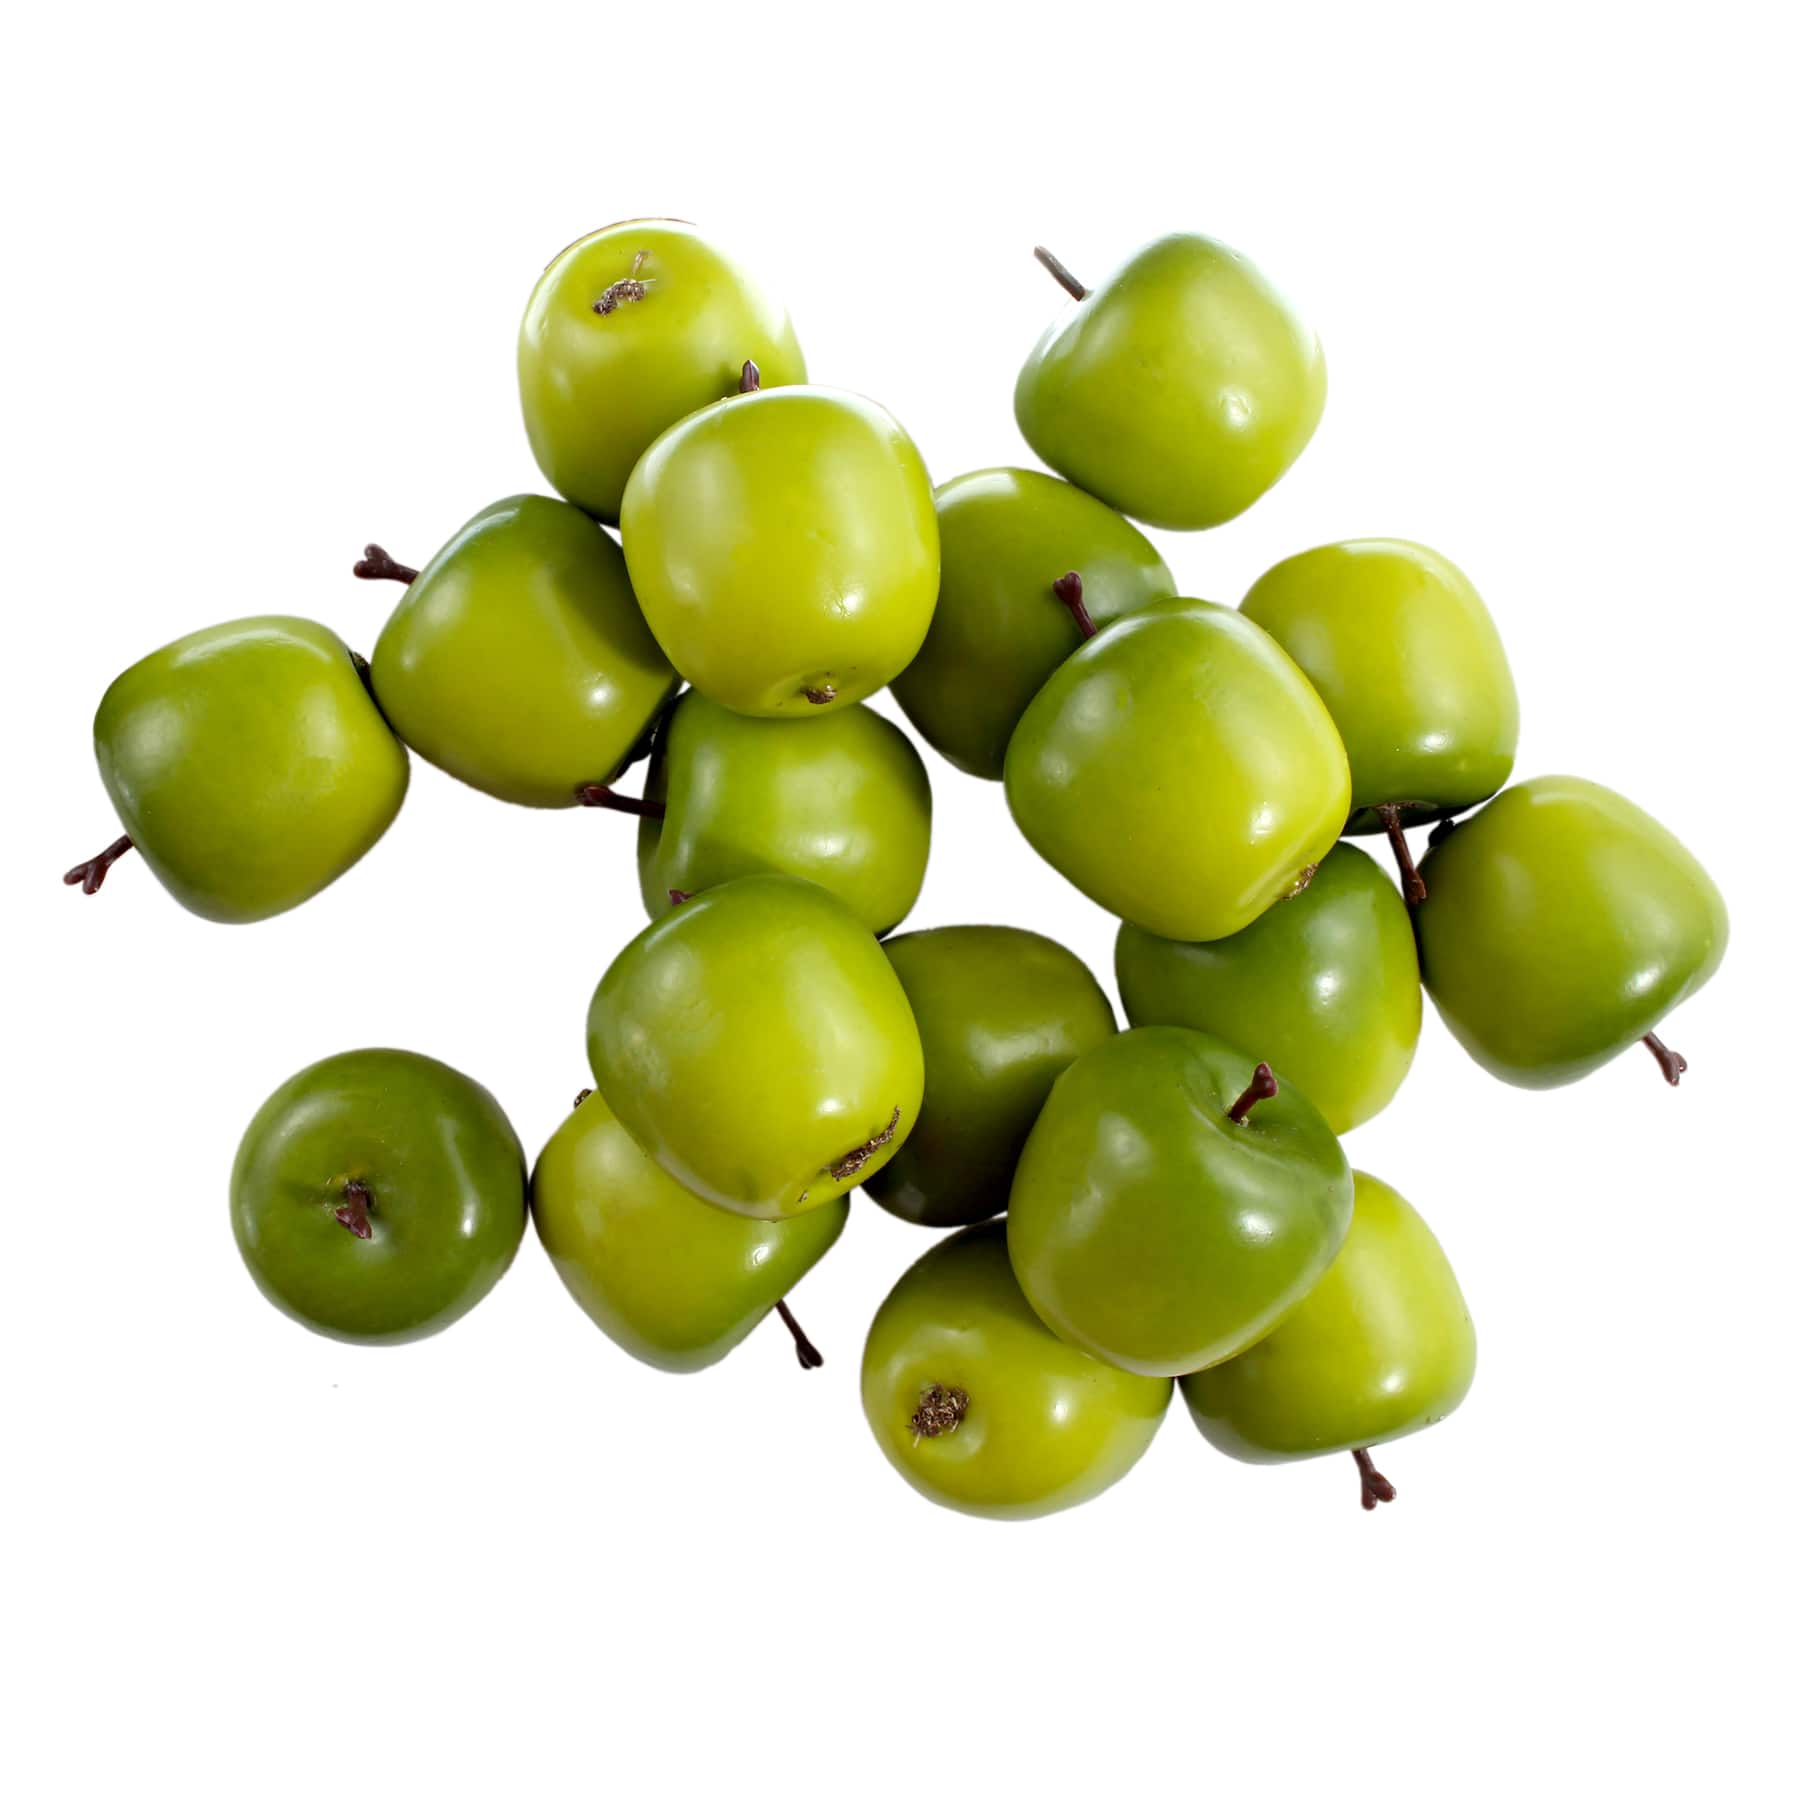 3 inch Weighted Artificial Fruit 3 Green Apples B400 